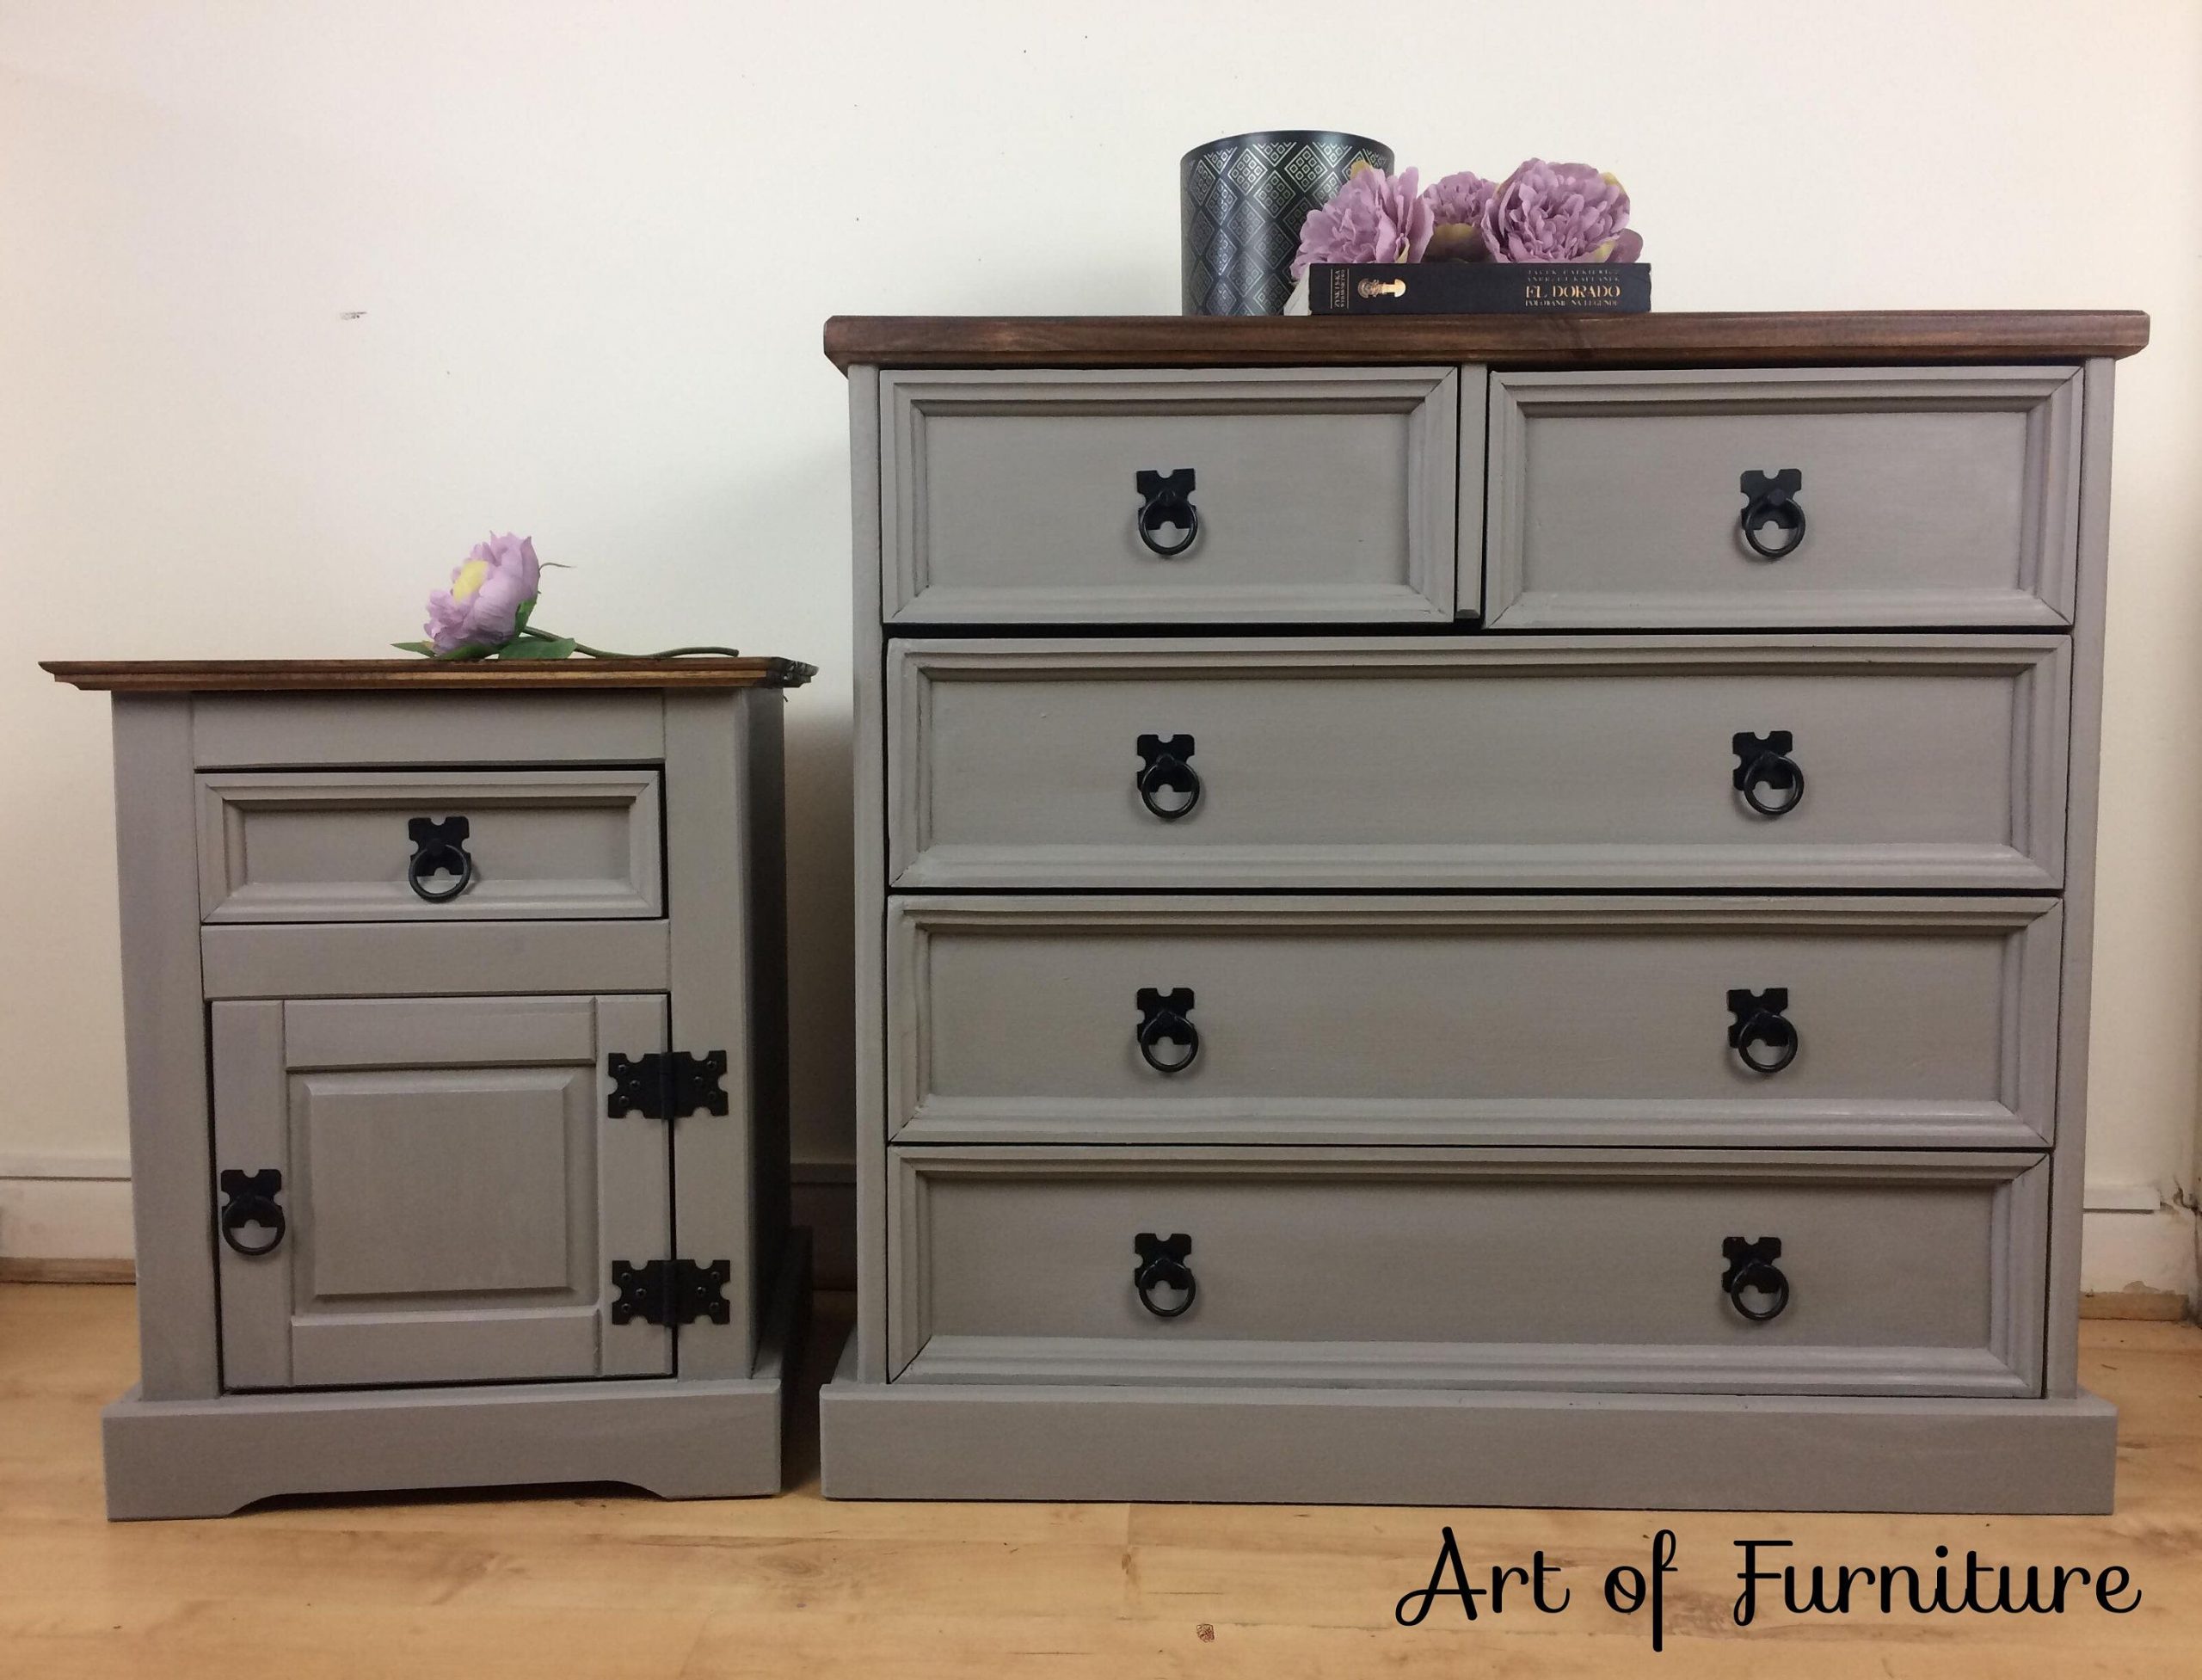 SOLD Mexican Pine Bedroom Furniture Chest of Drawers and bedside table hand painted in ANNIE SLOAN French Linen Chalk Paint Upcycled